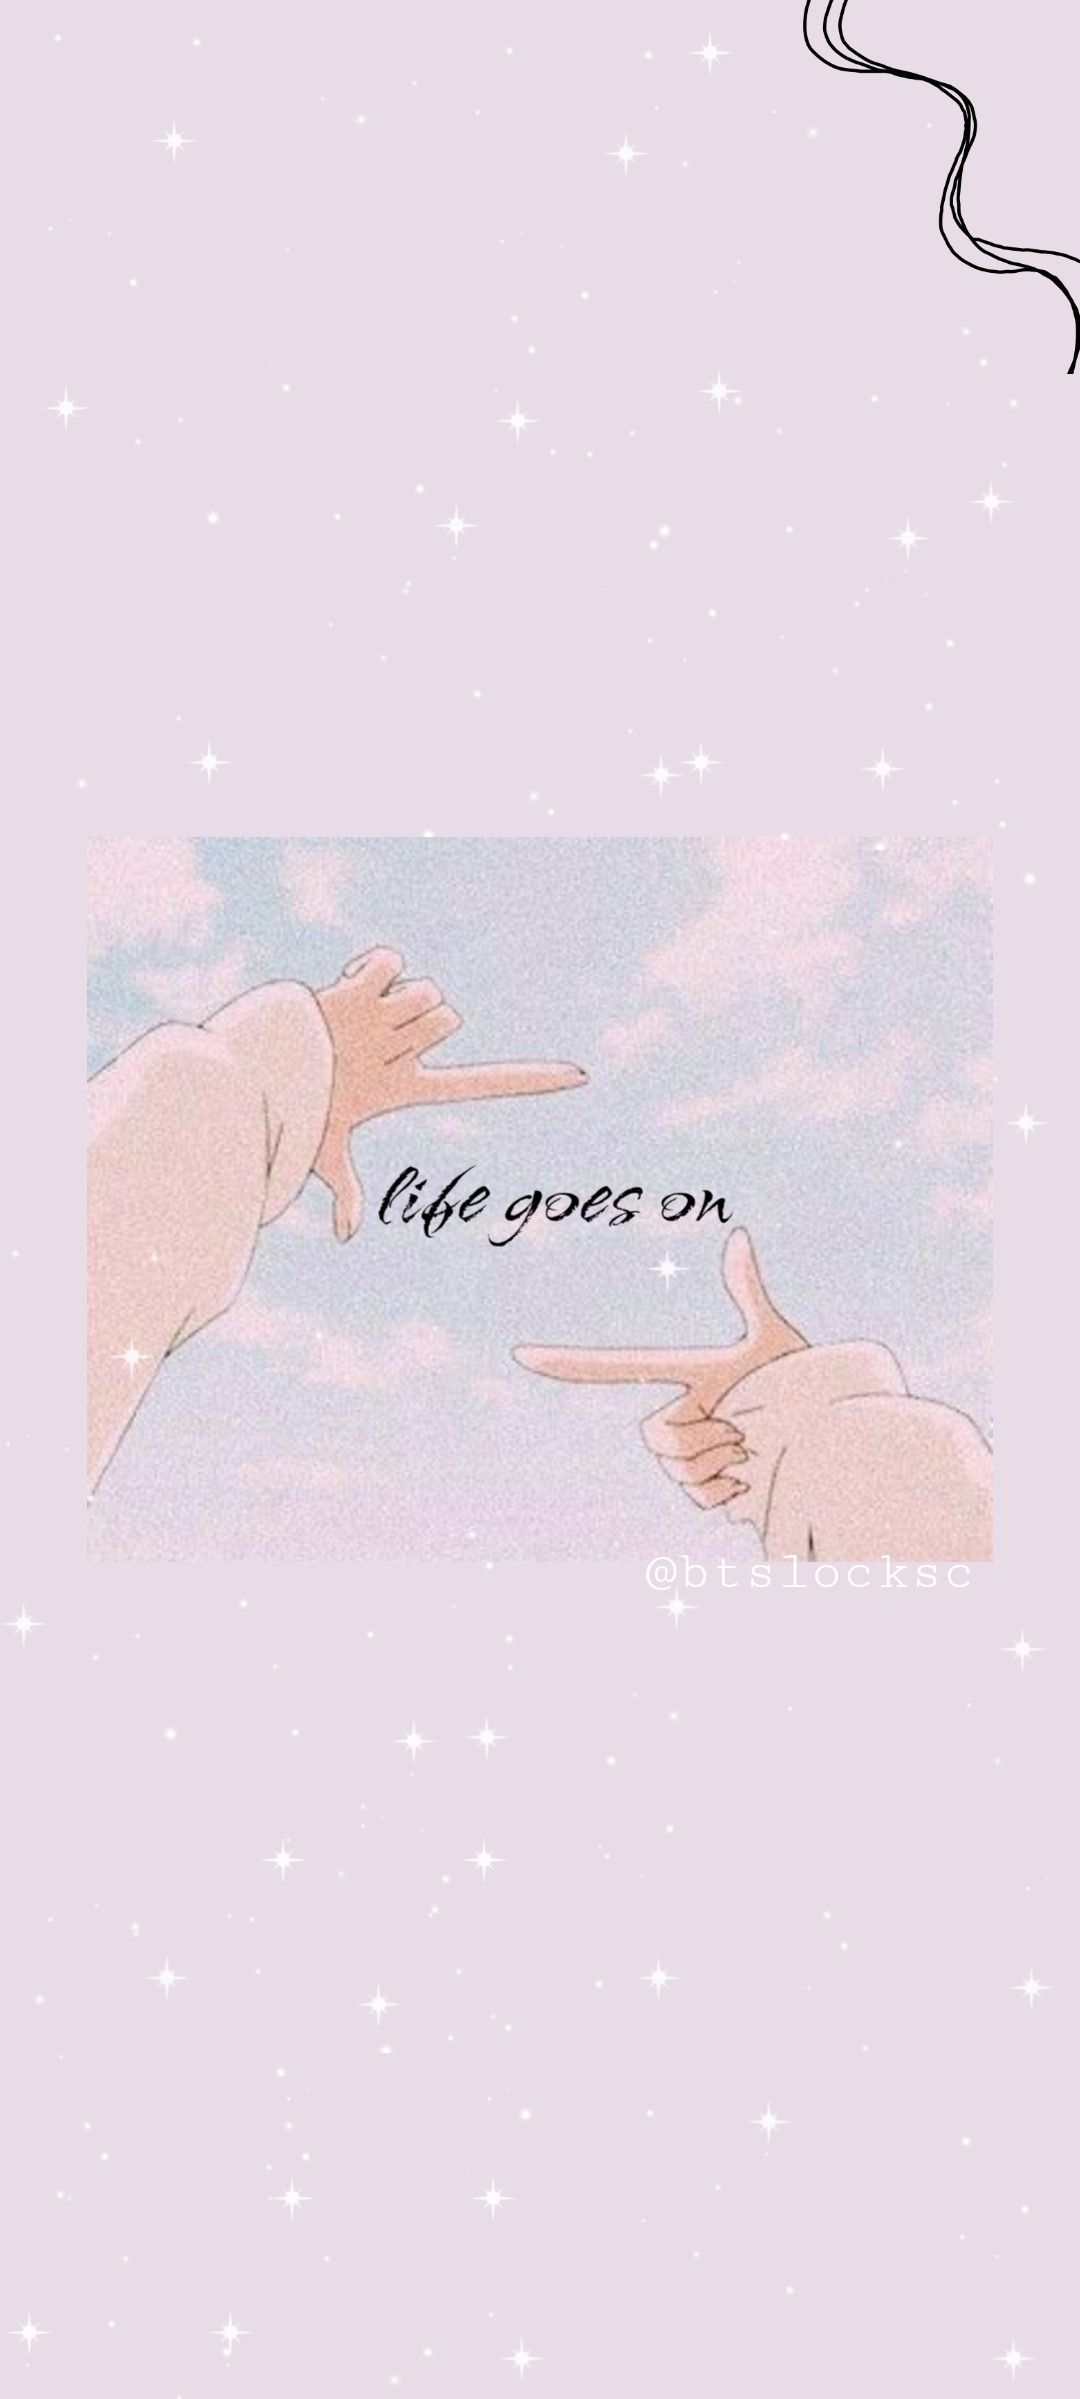 Life Goes On BTS wallpaper by UrLocalKPopEnthusiast  Download on ZEDGE   f8bf